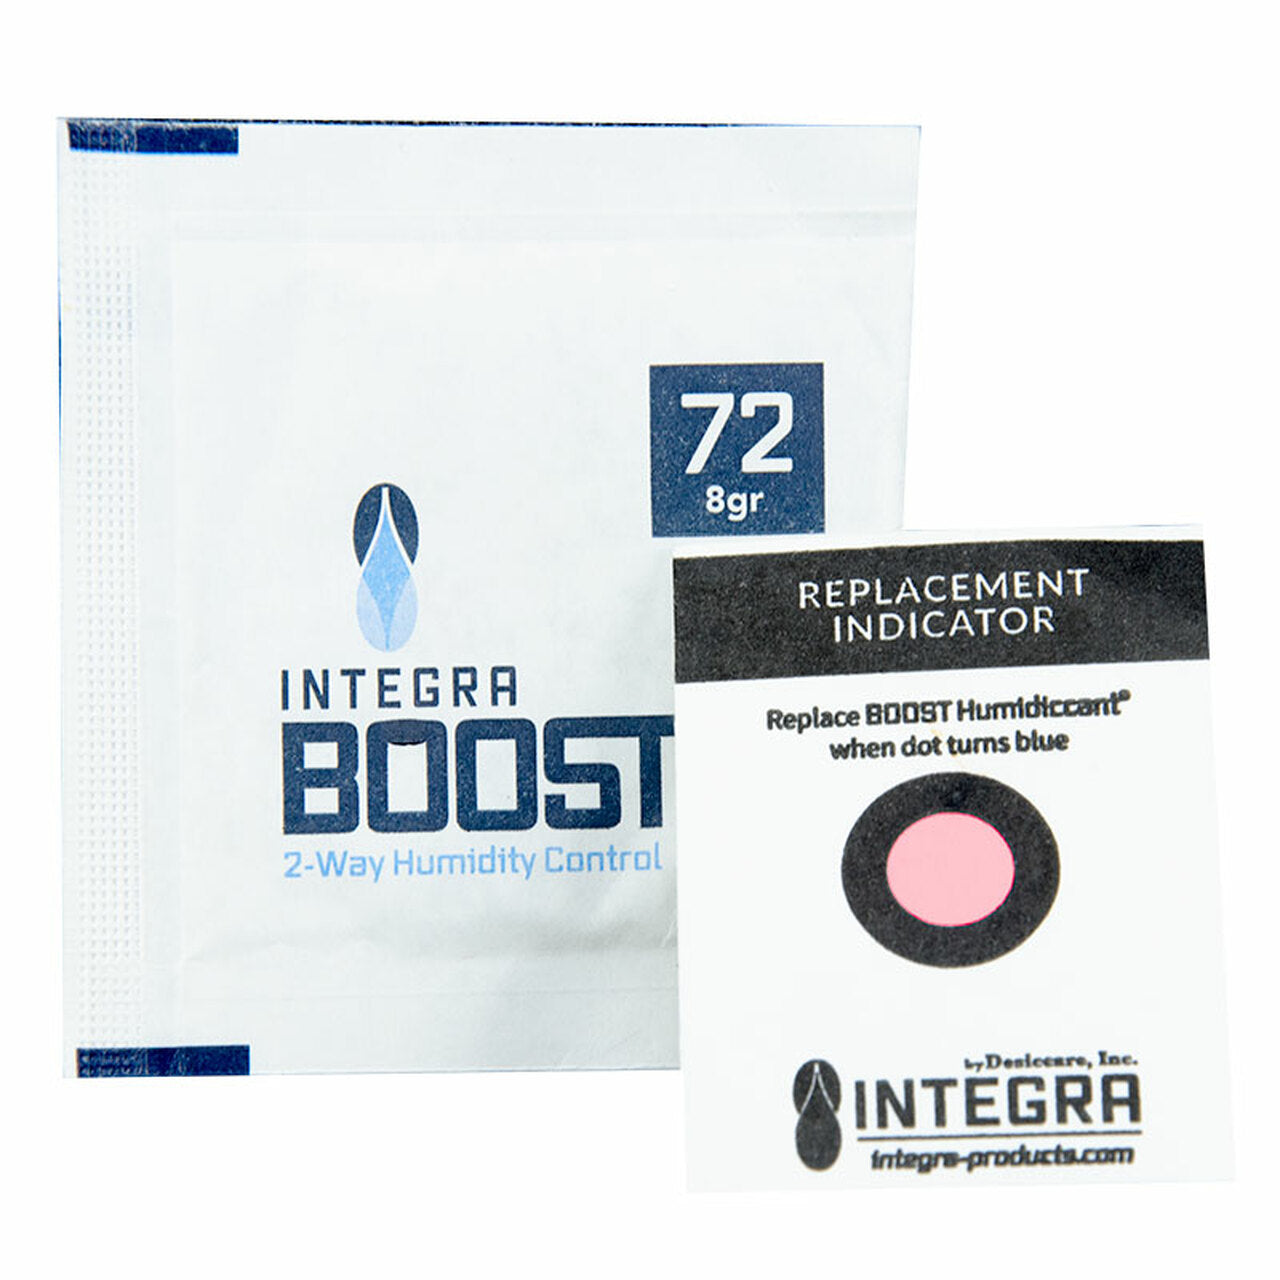 Desiccare Integra BOOST® 8 gram size 2-way humidity control packs are available in 72% RH style and FDA-compliant, 99% biodegradable, non-toxic and salt free. Includes humidity indicator cards; individually overwrapped